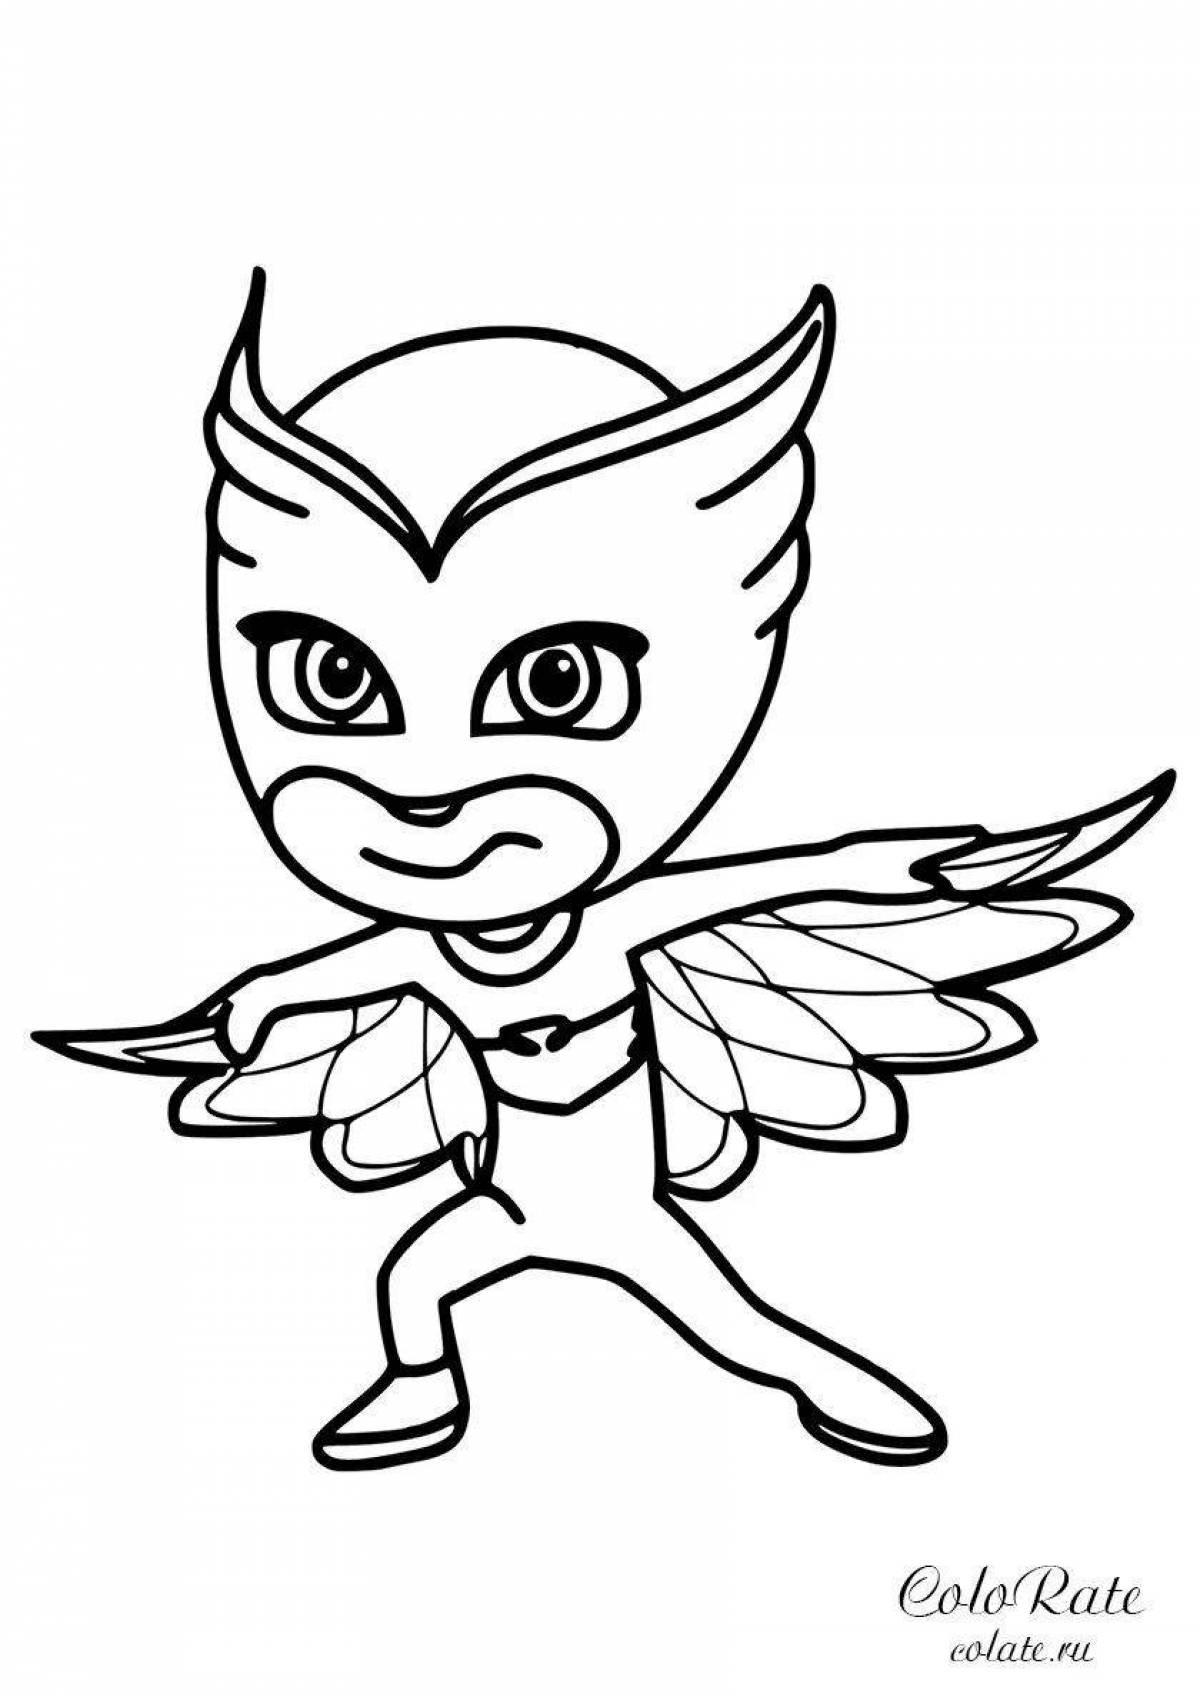 Coloring page incredible masked heroes